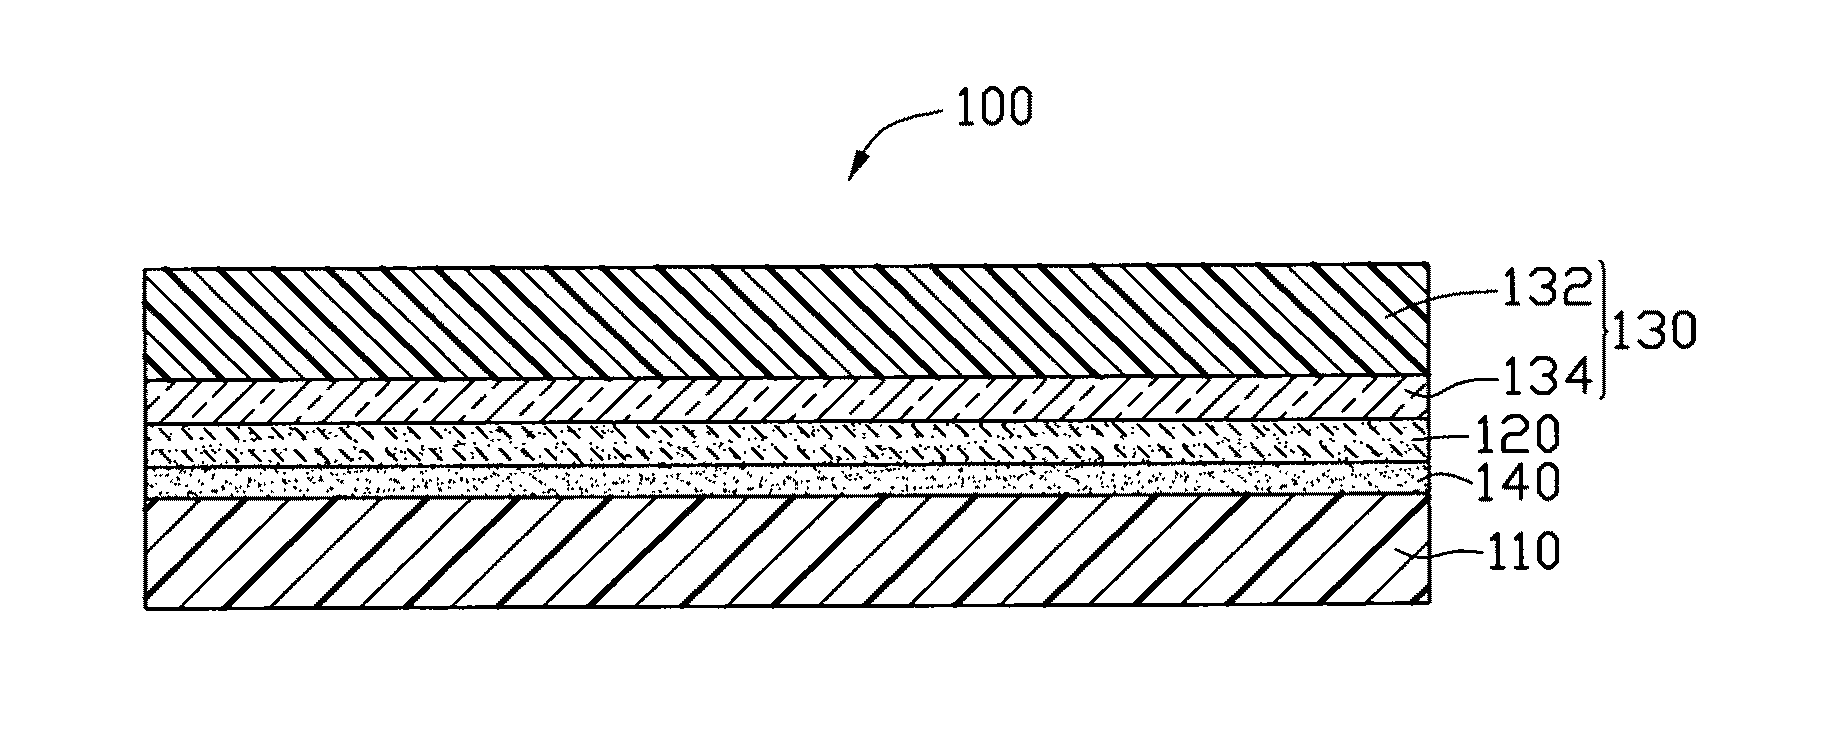 Protective device for protecting carbon nanotube film and method for making the same